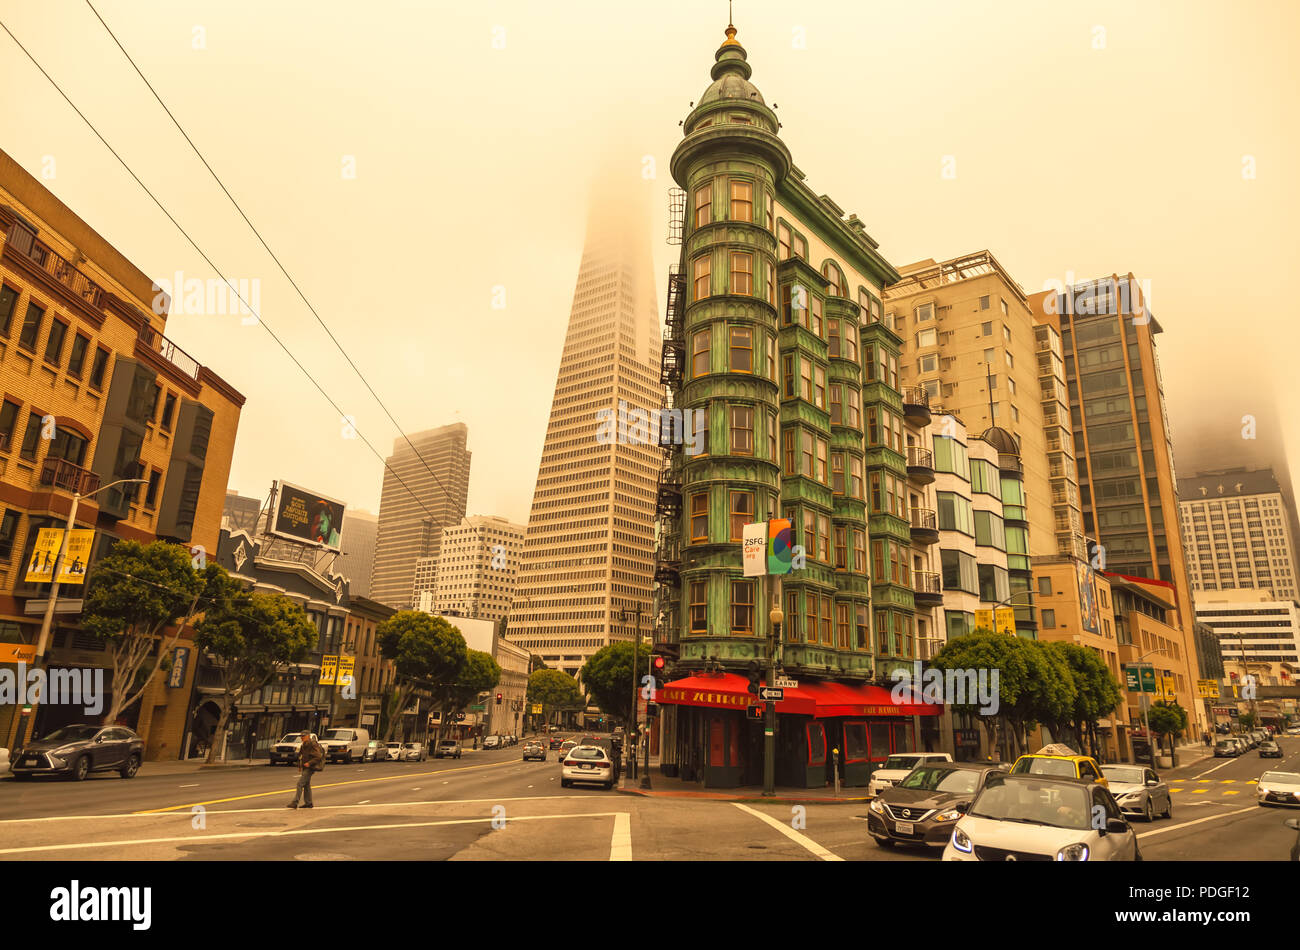 San Francisco was covered with smoke affected from the Yolo County wildfire on July 01, 2018, California, United States. Stock Photo